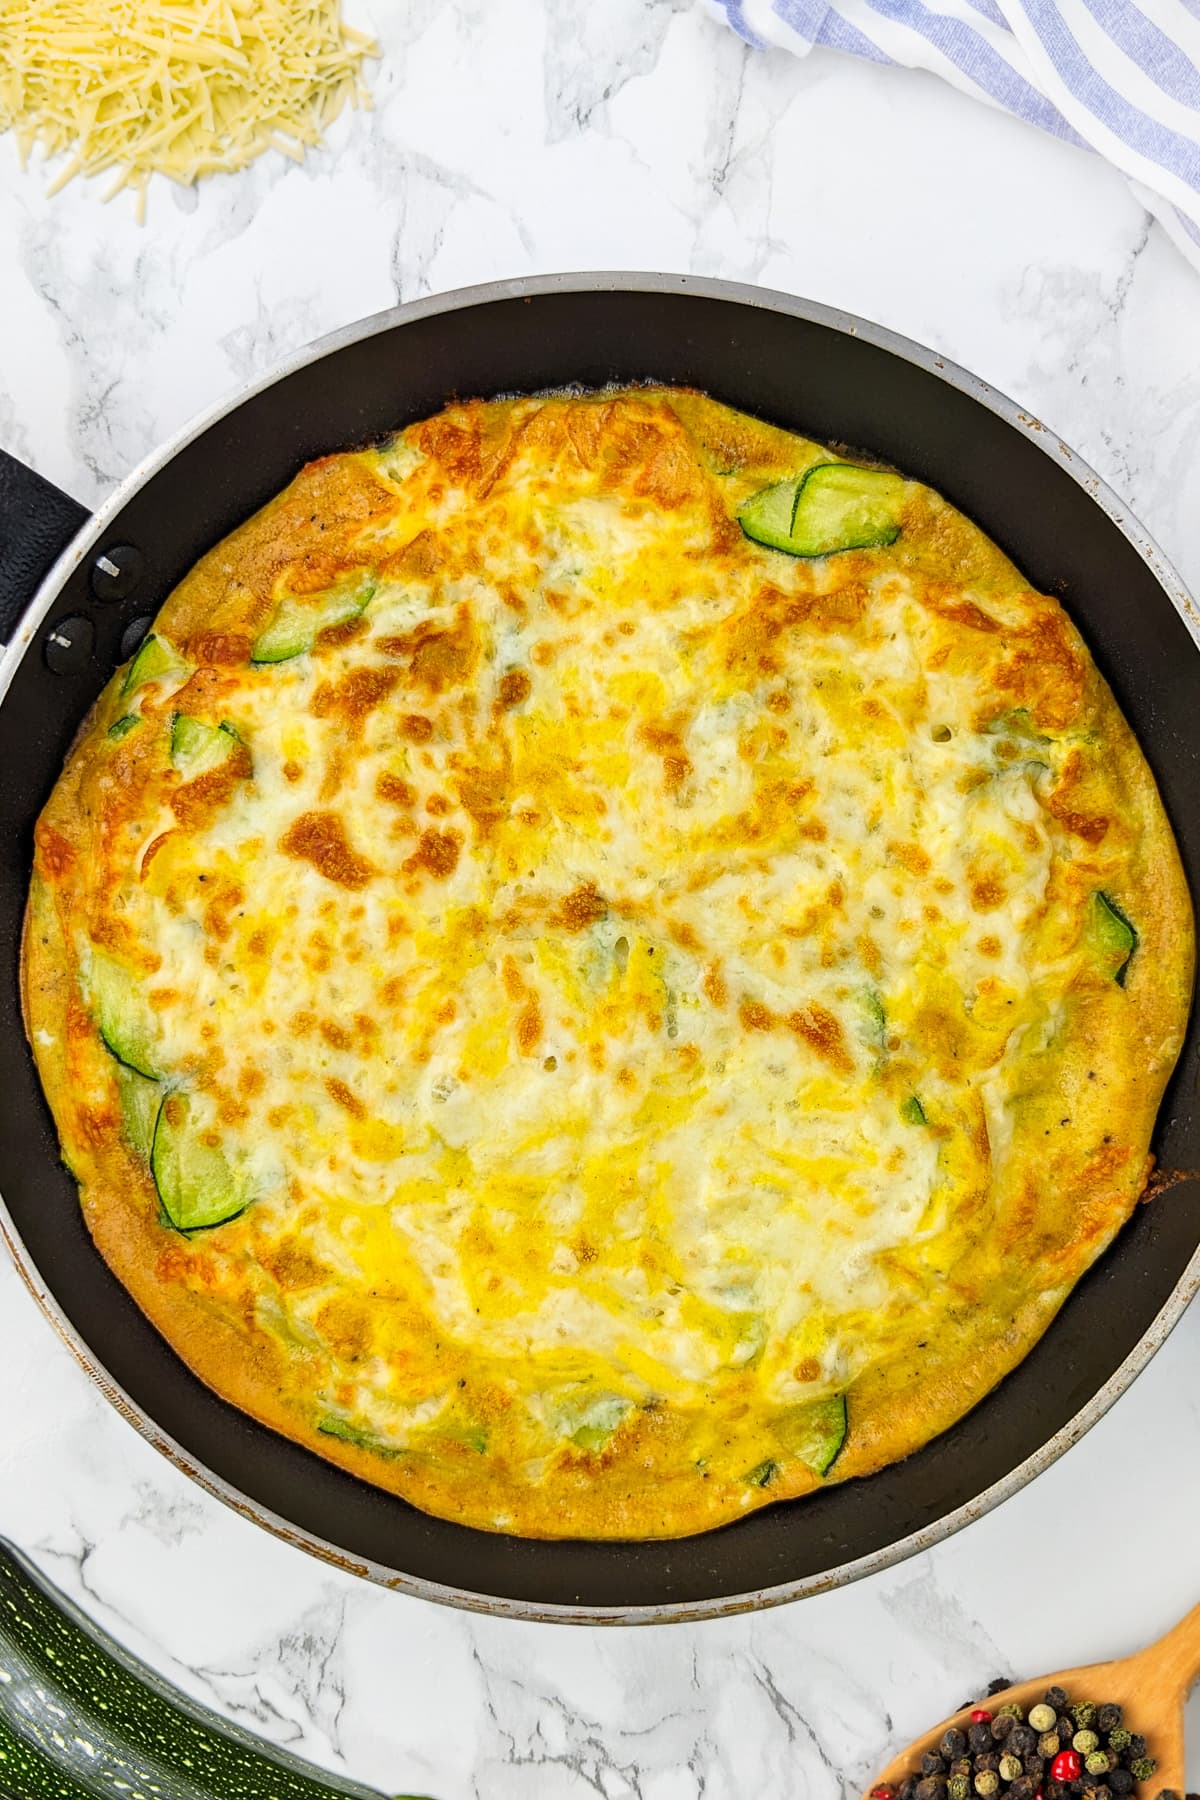 Top view of zucchini frittata with zucchini and basil leaves in a frying pan.